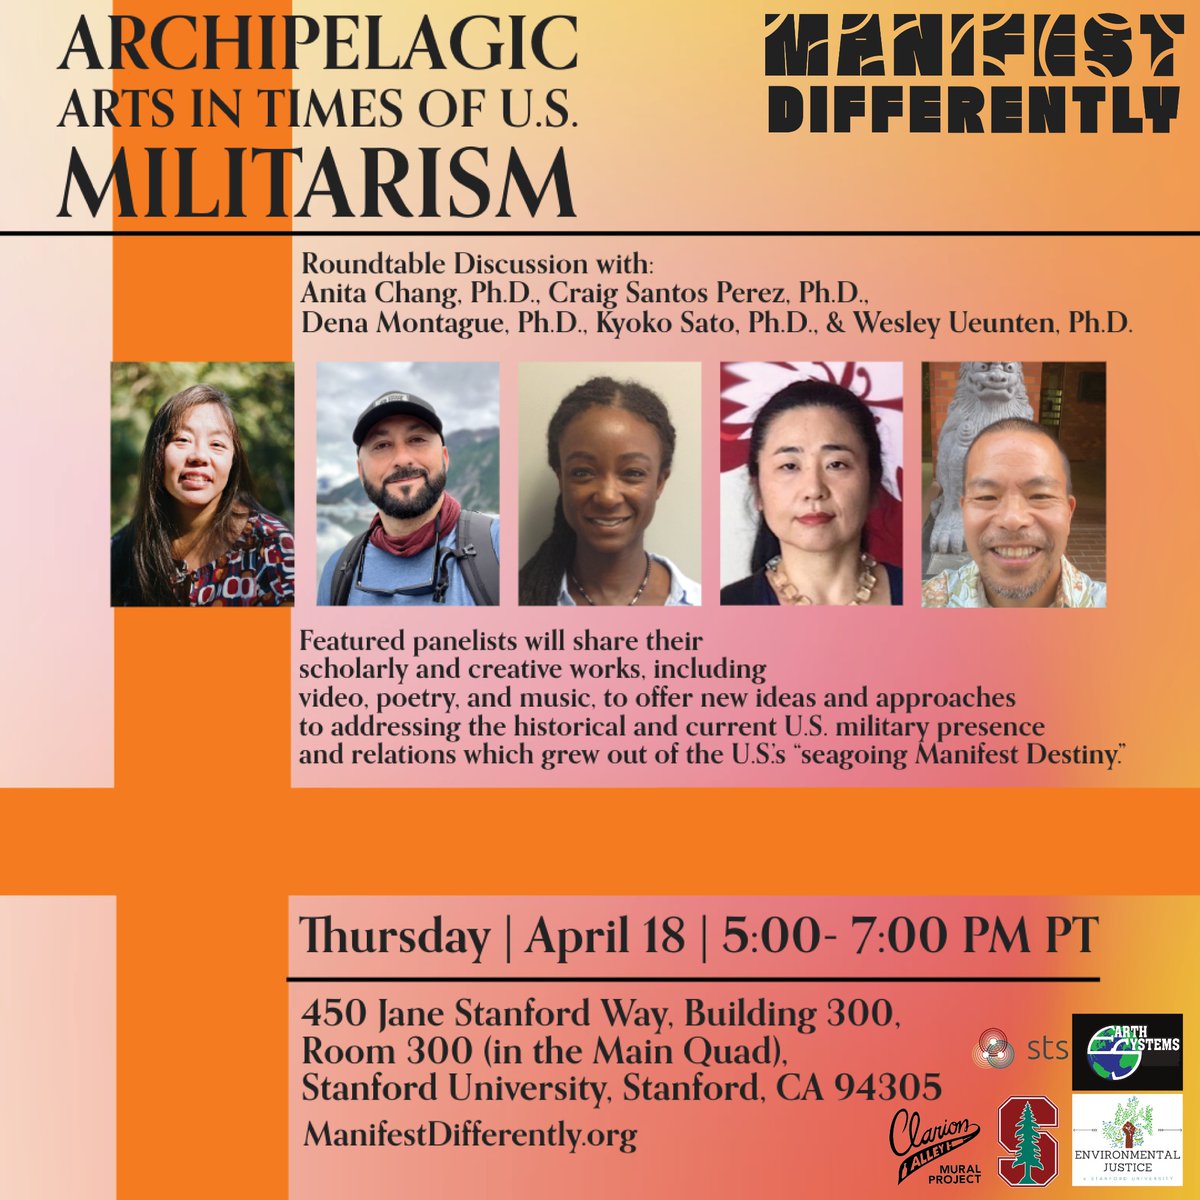 Also next week! I’m looking forward to being part of this event at Stanford!